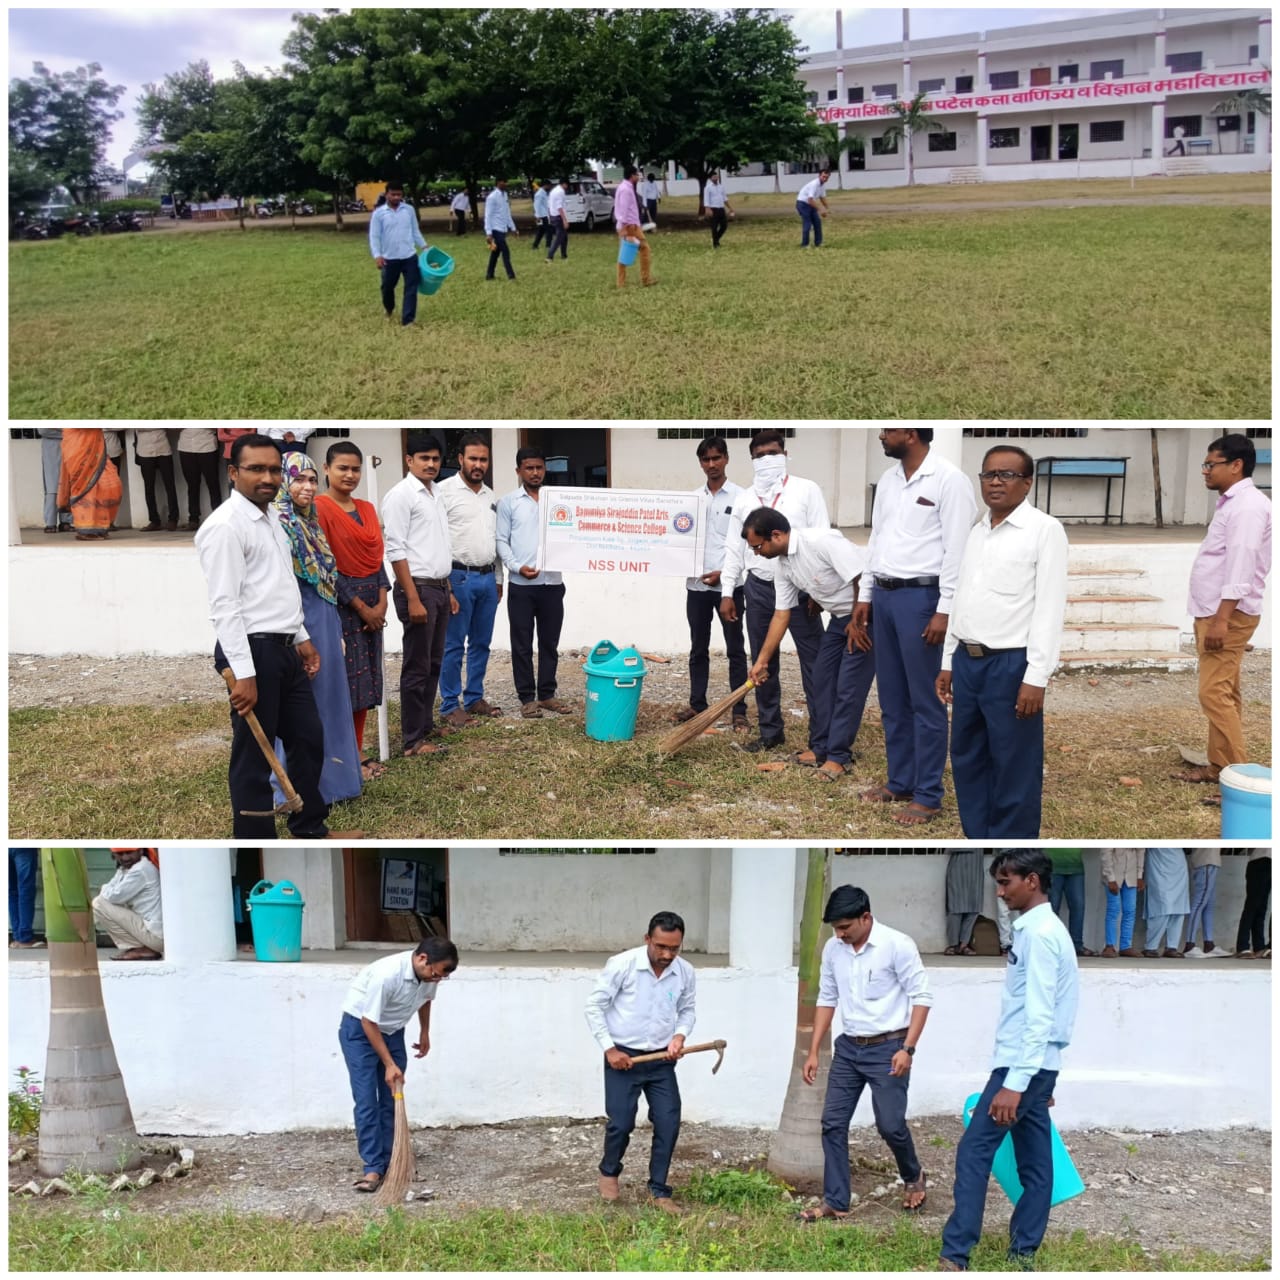 Campus cleanliness drive on the occasion of Mahatma Gandhi jayanti 2021